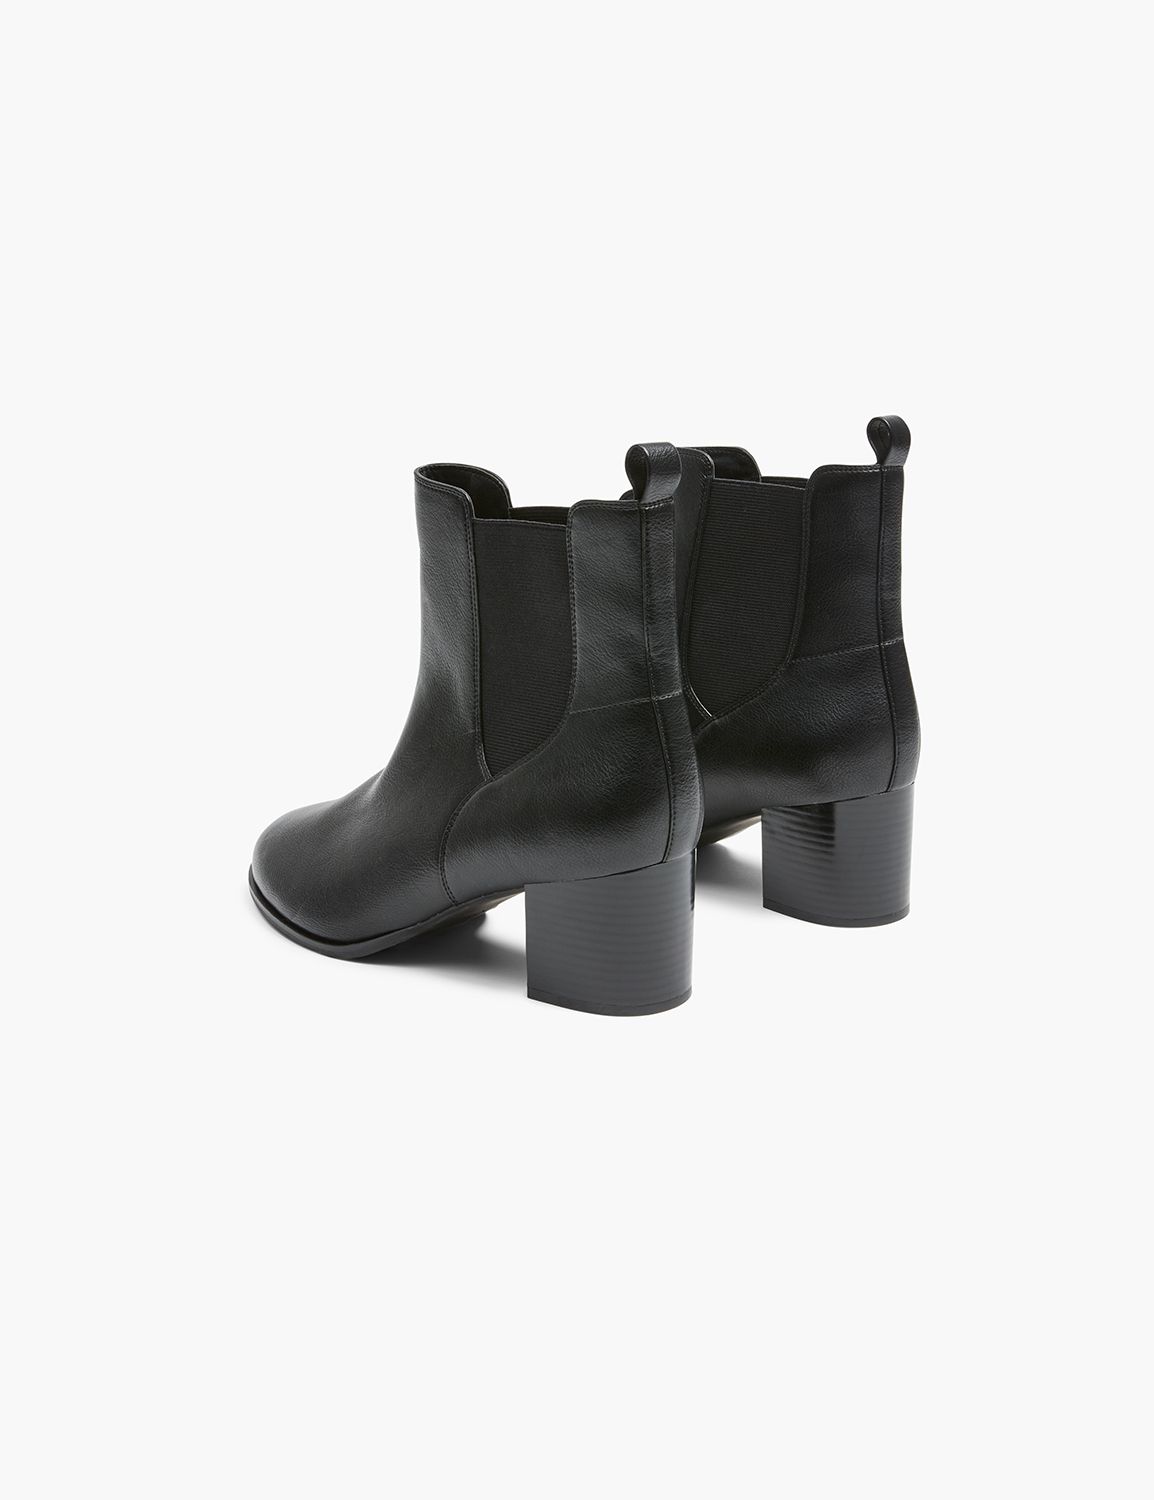 ROUNDED TOE SIDE STRETCH BOOTIE | LaneBryant